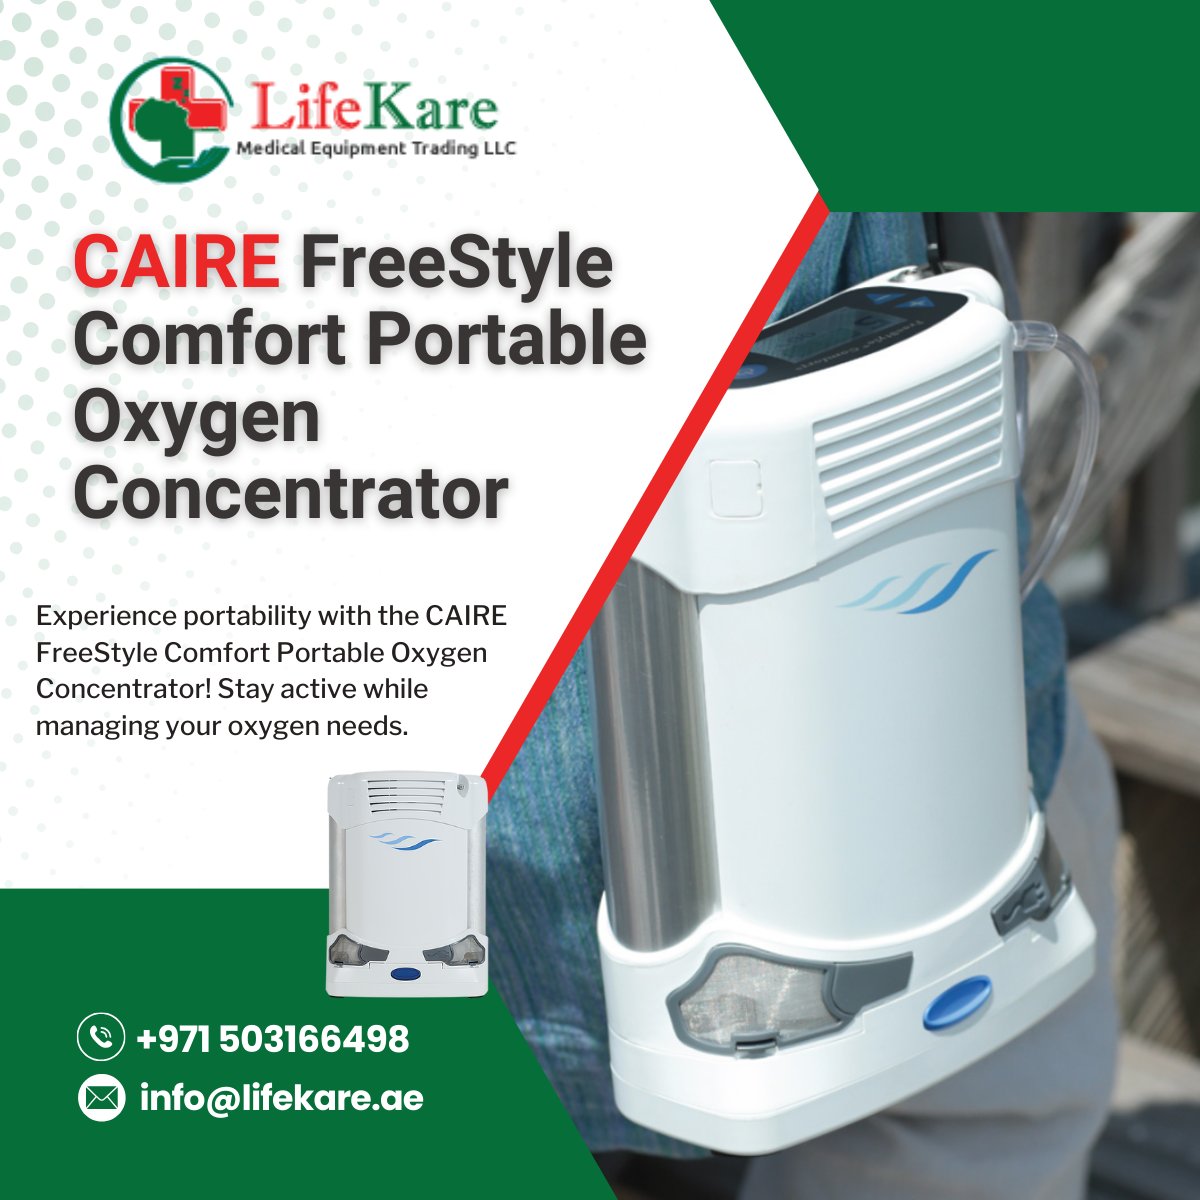 CAIRE FreeStyle Comfort Portable Oxygen Concentrator

Experience portability with the CAIRE FreeStyle Comfort Portable Oxygen Concentrator! Stay active while managing your oxygen needs.

+971 503166498
info@lifekare.ae

#CAIREFreeStyleComfort #OxygenConcentrator #PortableOxygen